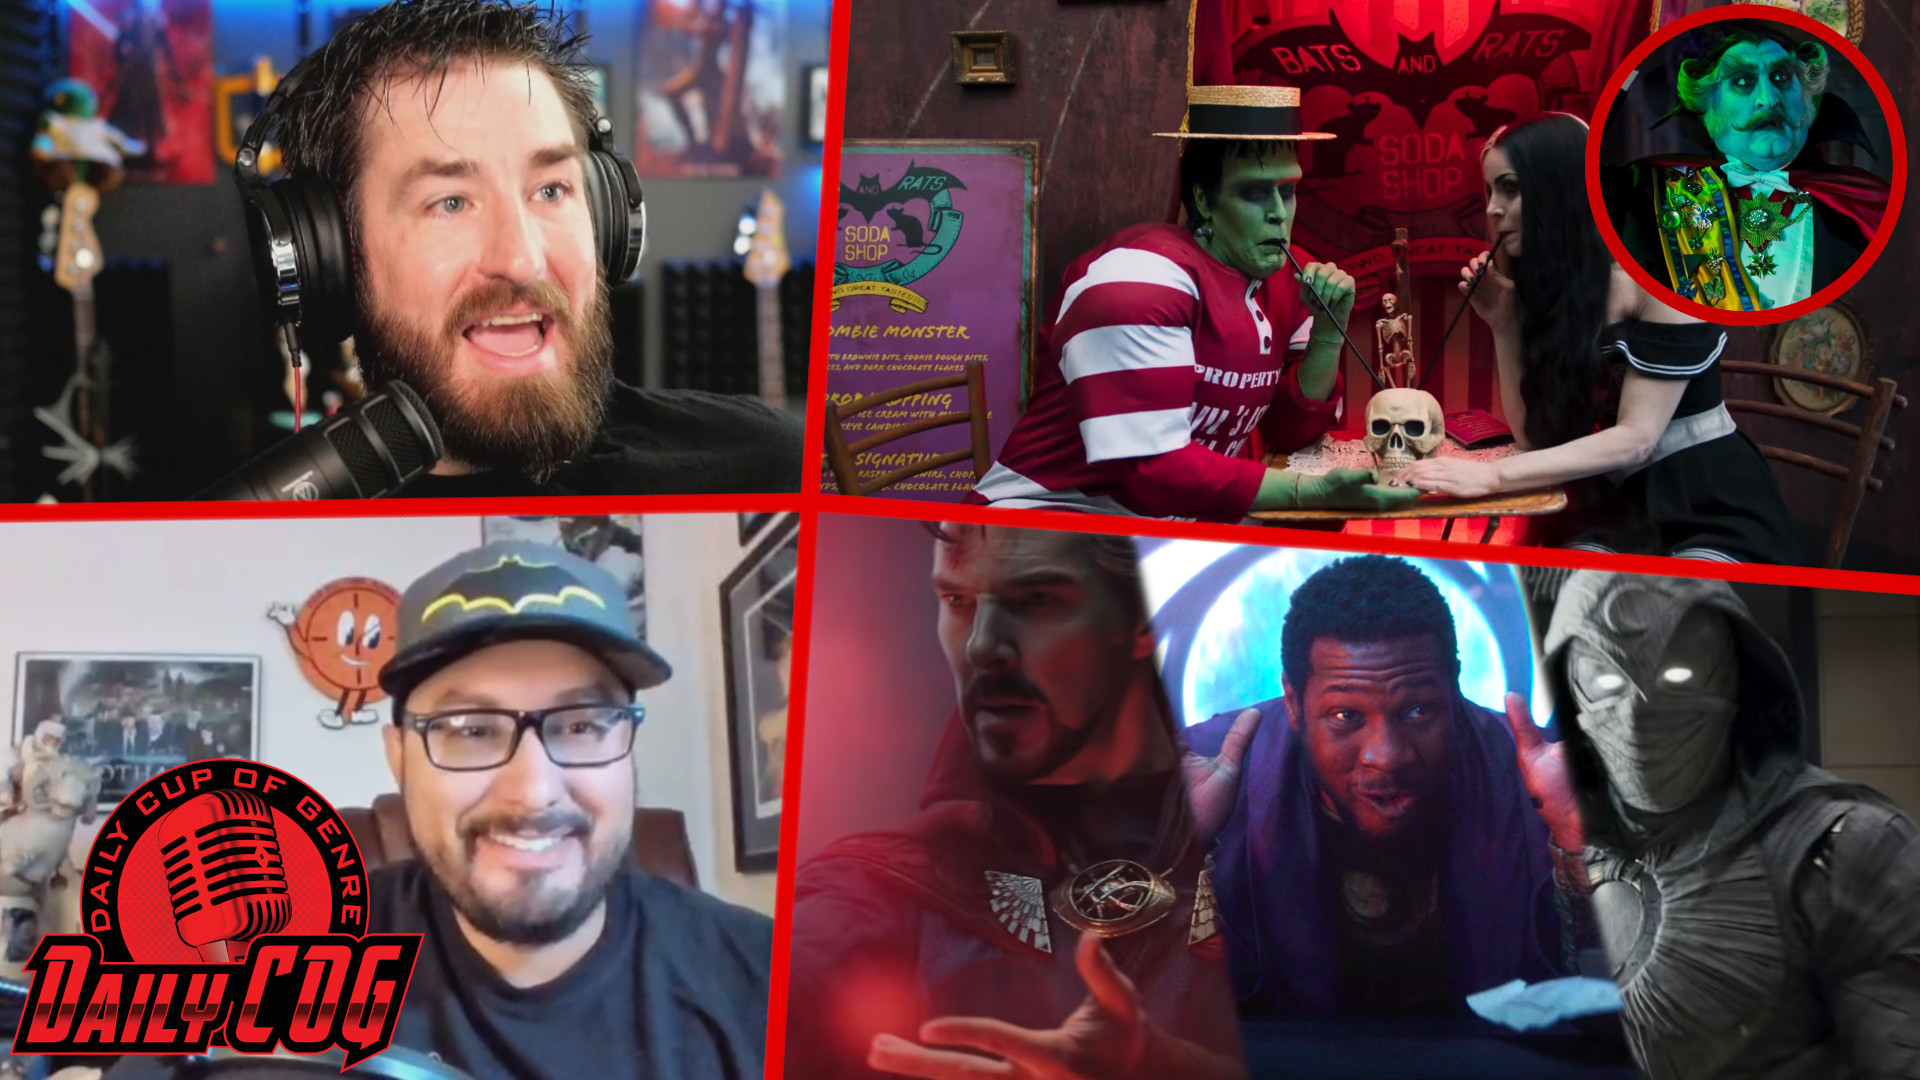 The Munsters Trailer Reaction James Webb Images And Rating MCU Phase 4 Daily COG YT